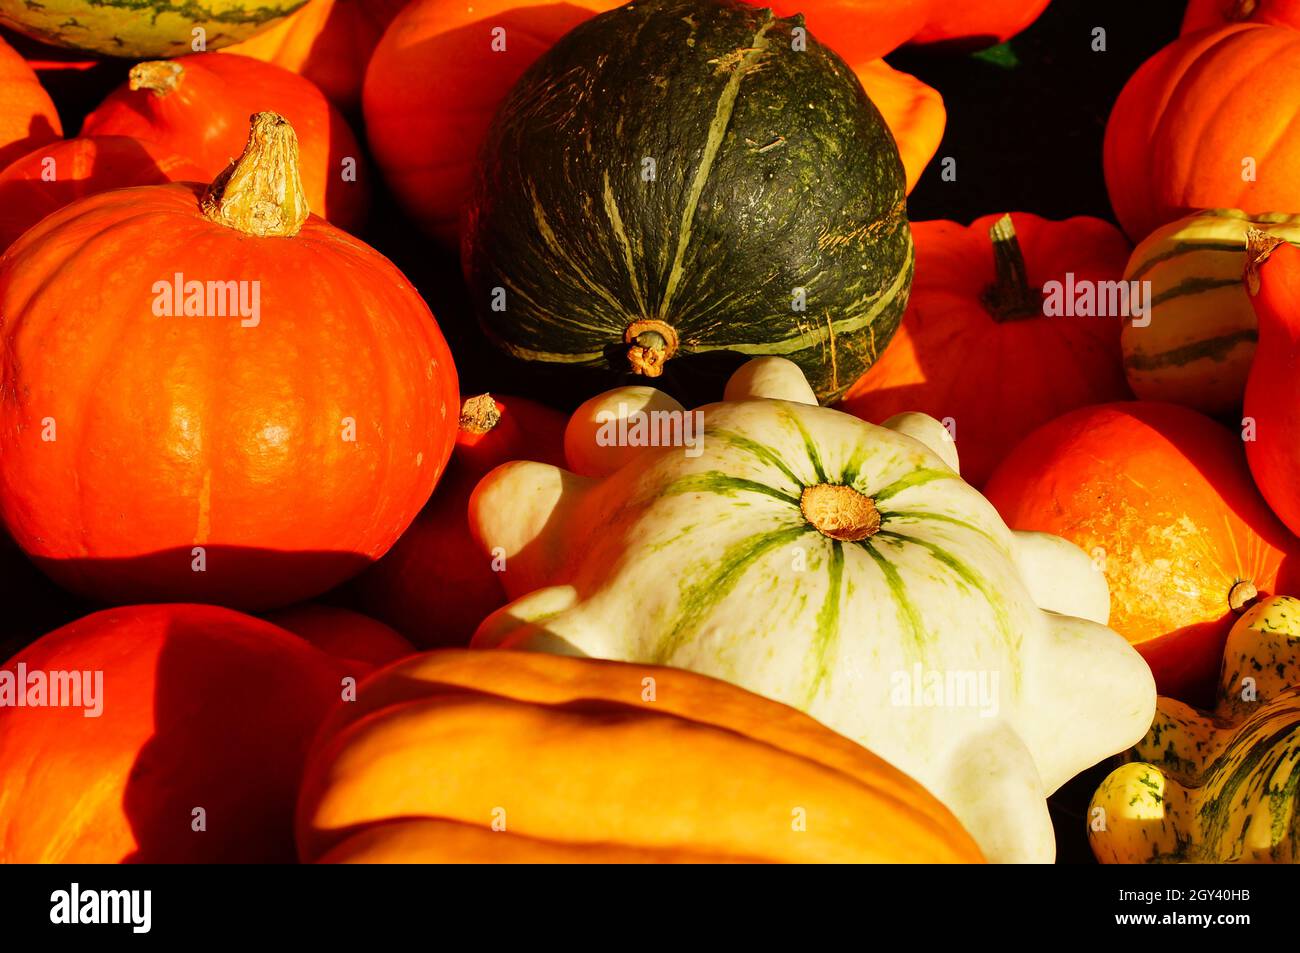 Colourful edible pumpkins are offered at a market. Stock Photo